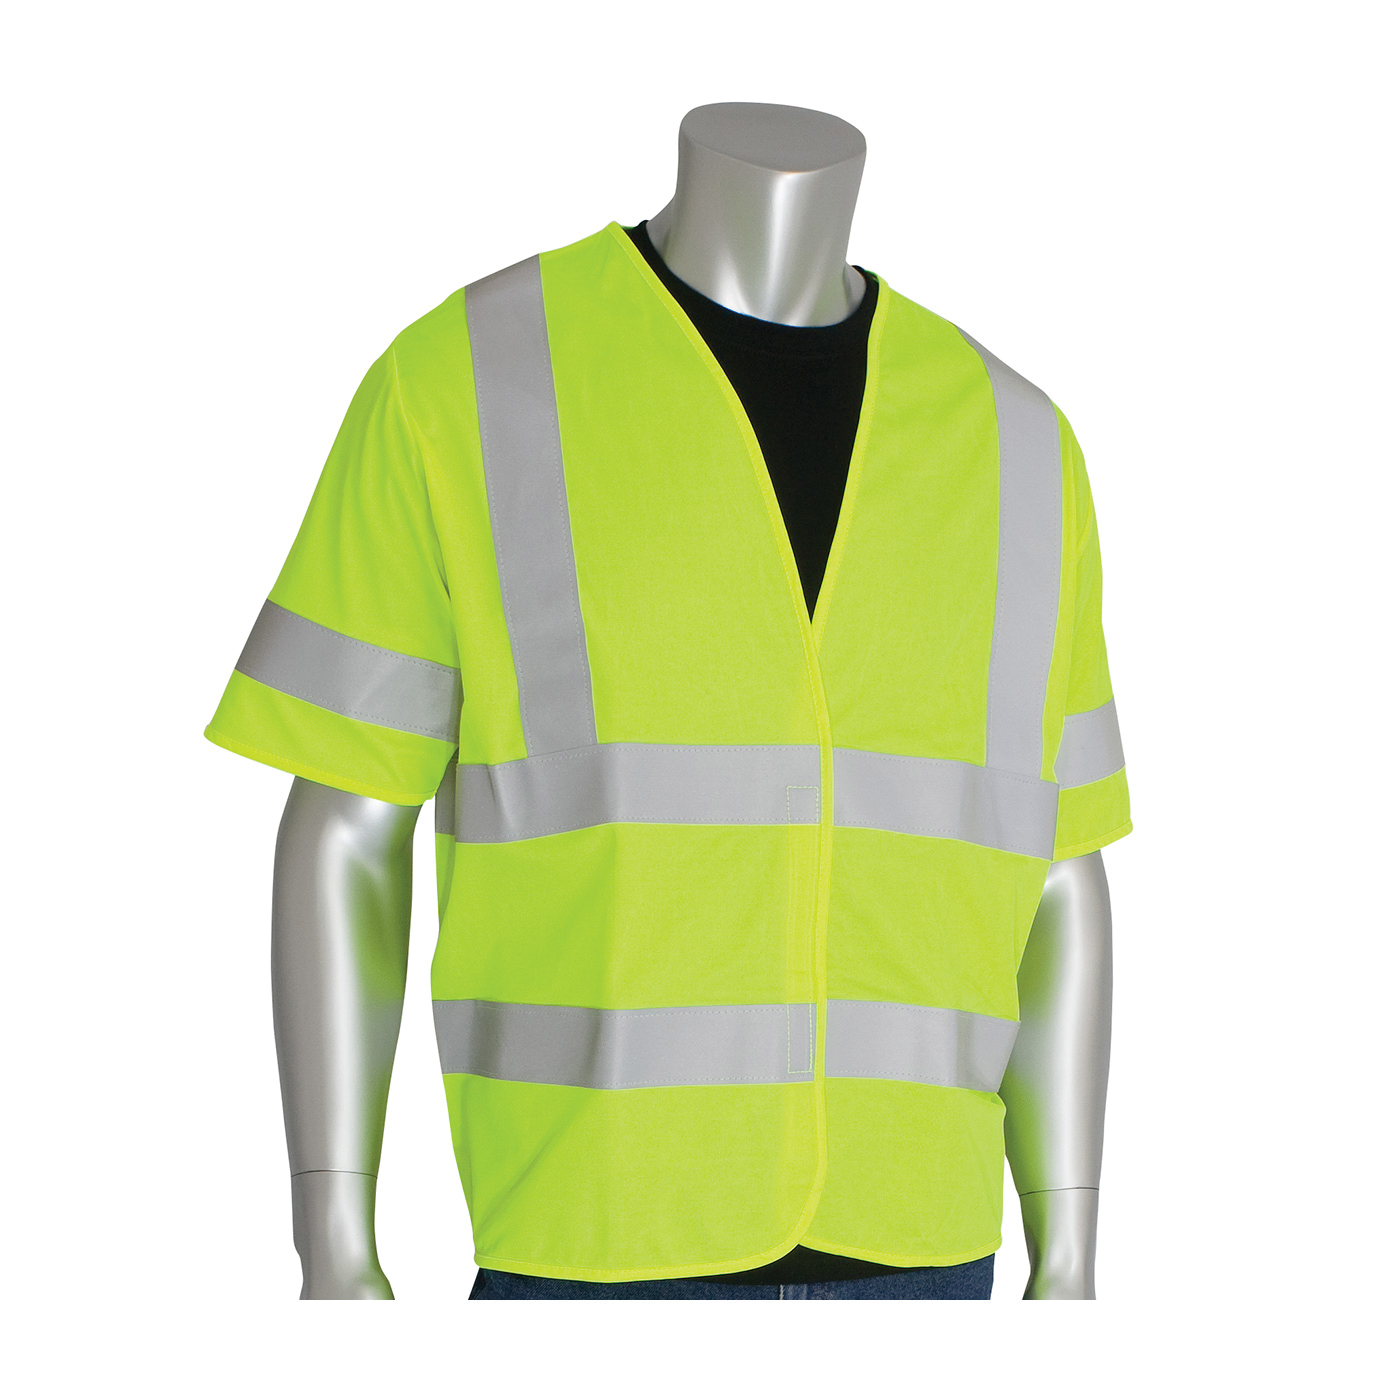 PIP® SafetyGear 305-HSSVFRLY-S/M FR Treated Standard Solid Vest, S to M, Hi-Viz Yellow, Polyester, Hook and Loop Closure, ANSI Class: Class 3, ANSI/ISEA 107